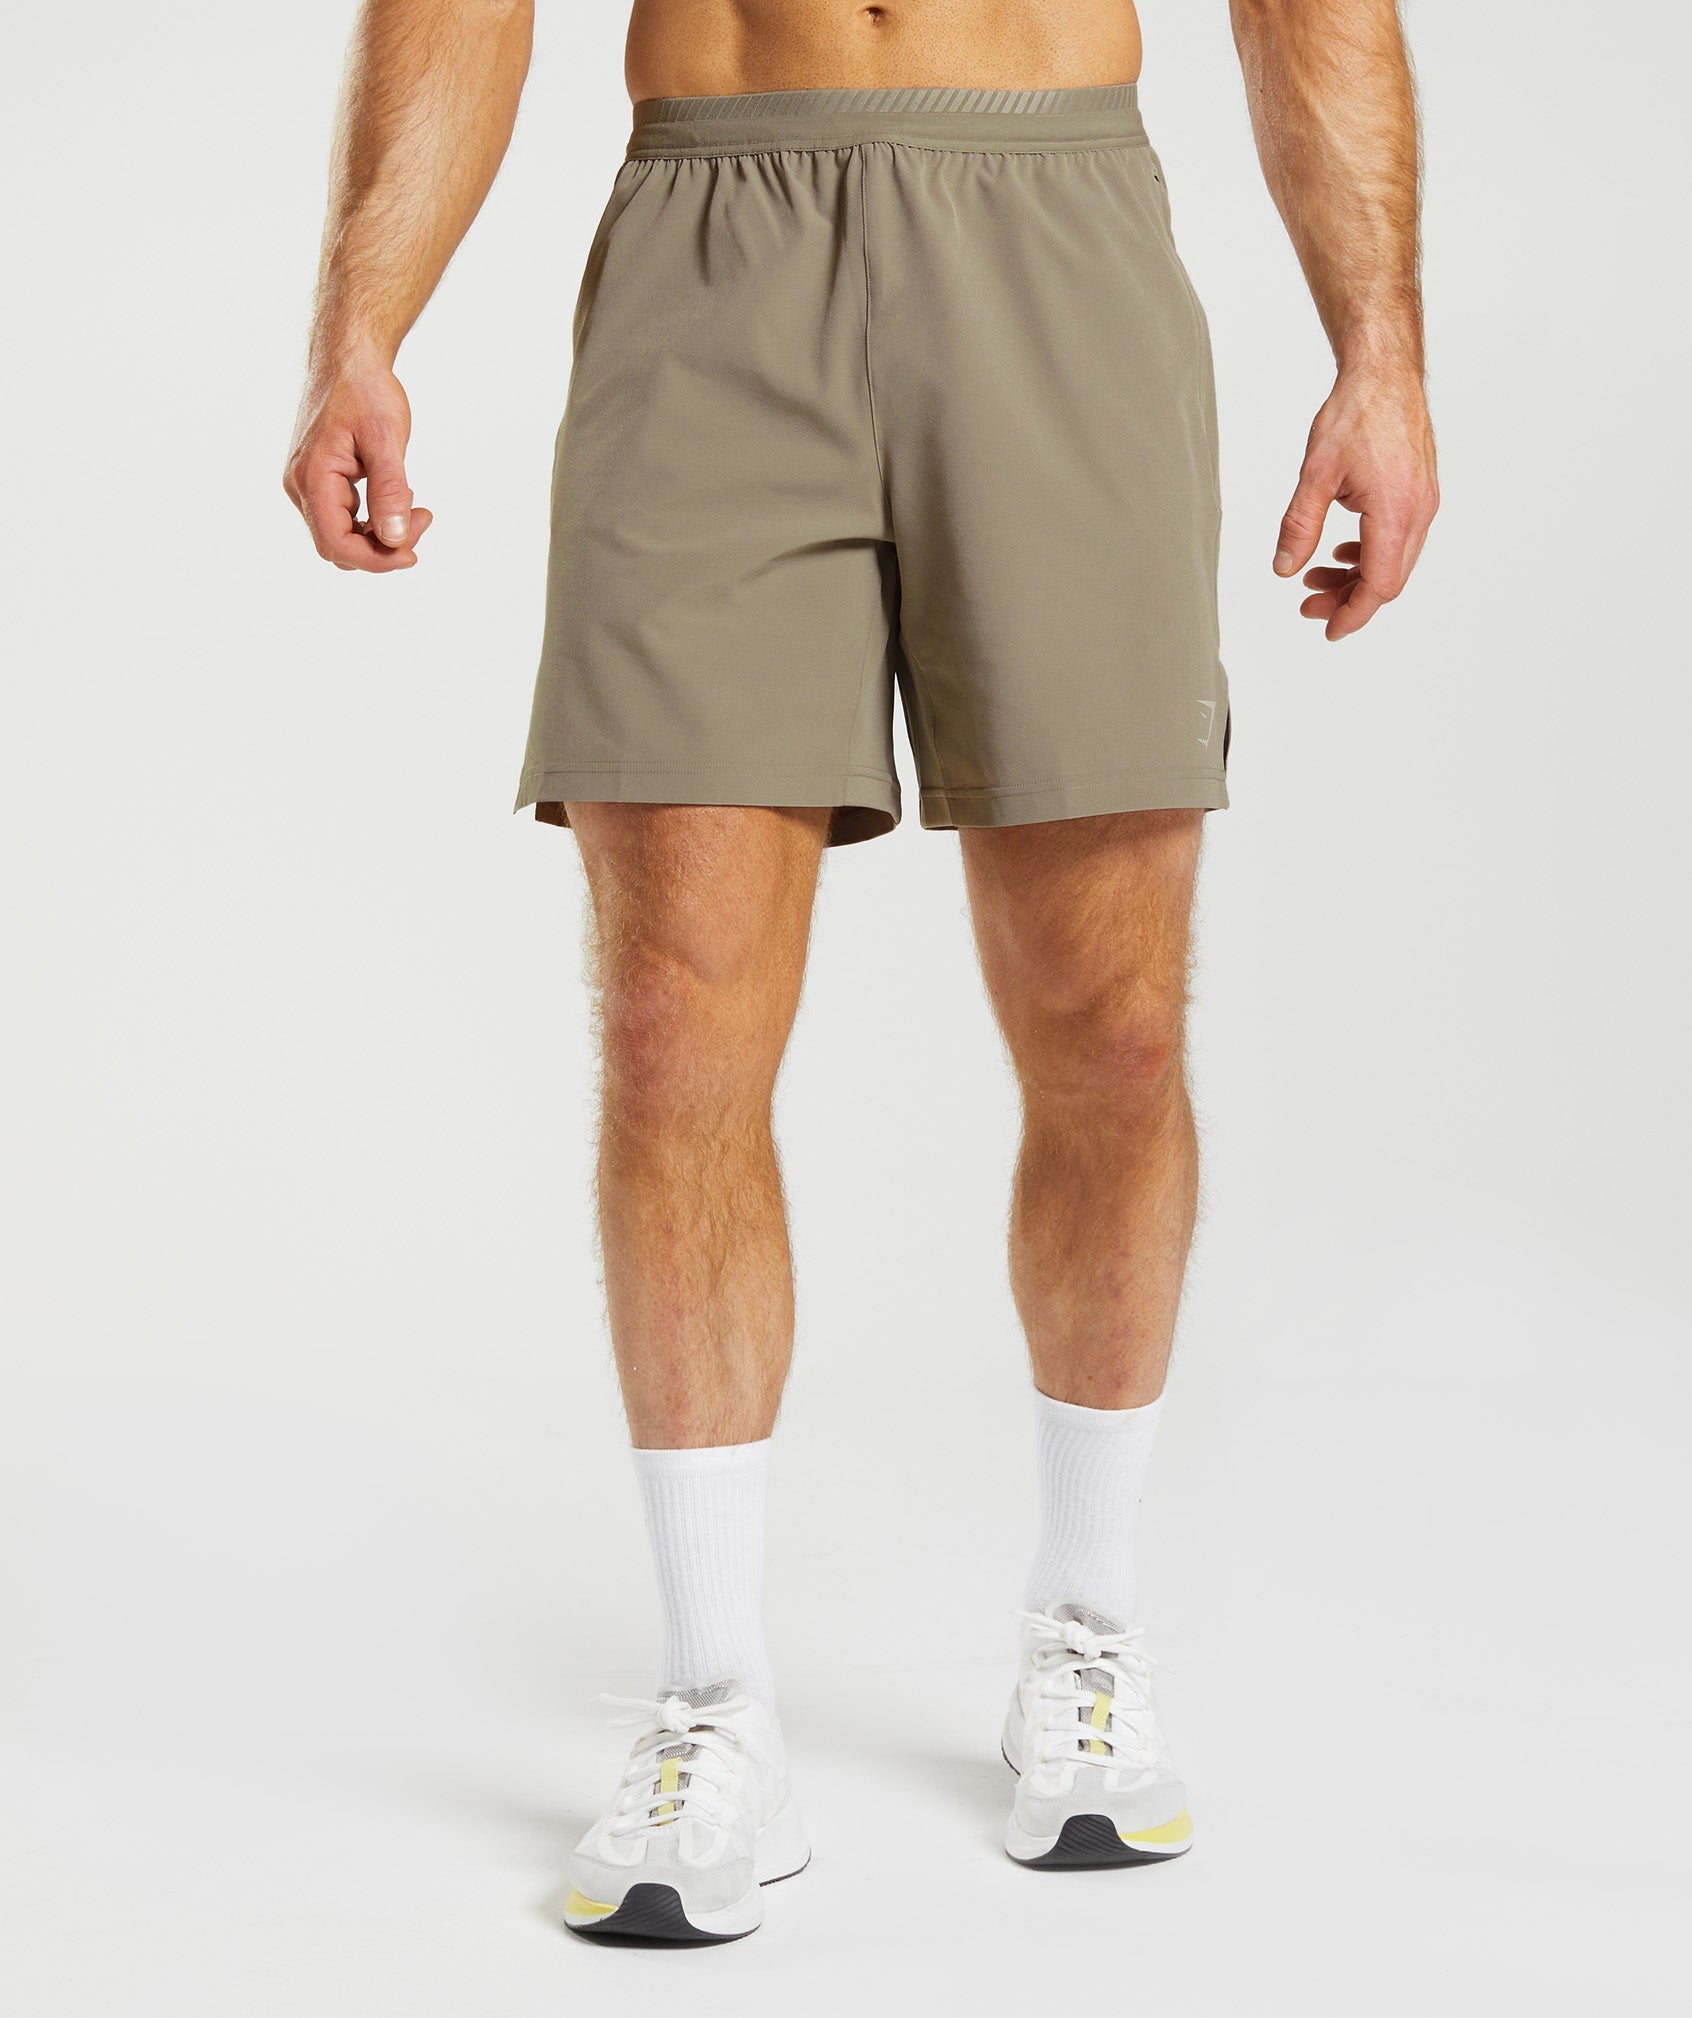 Apex 7" Hybrid Shorts in {{variantColor} is out of stock